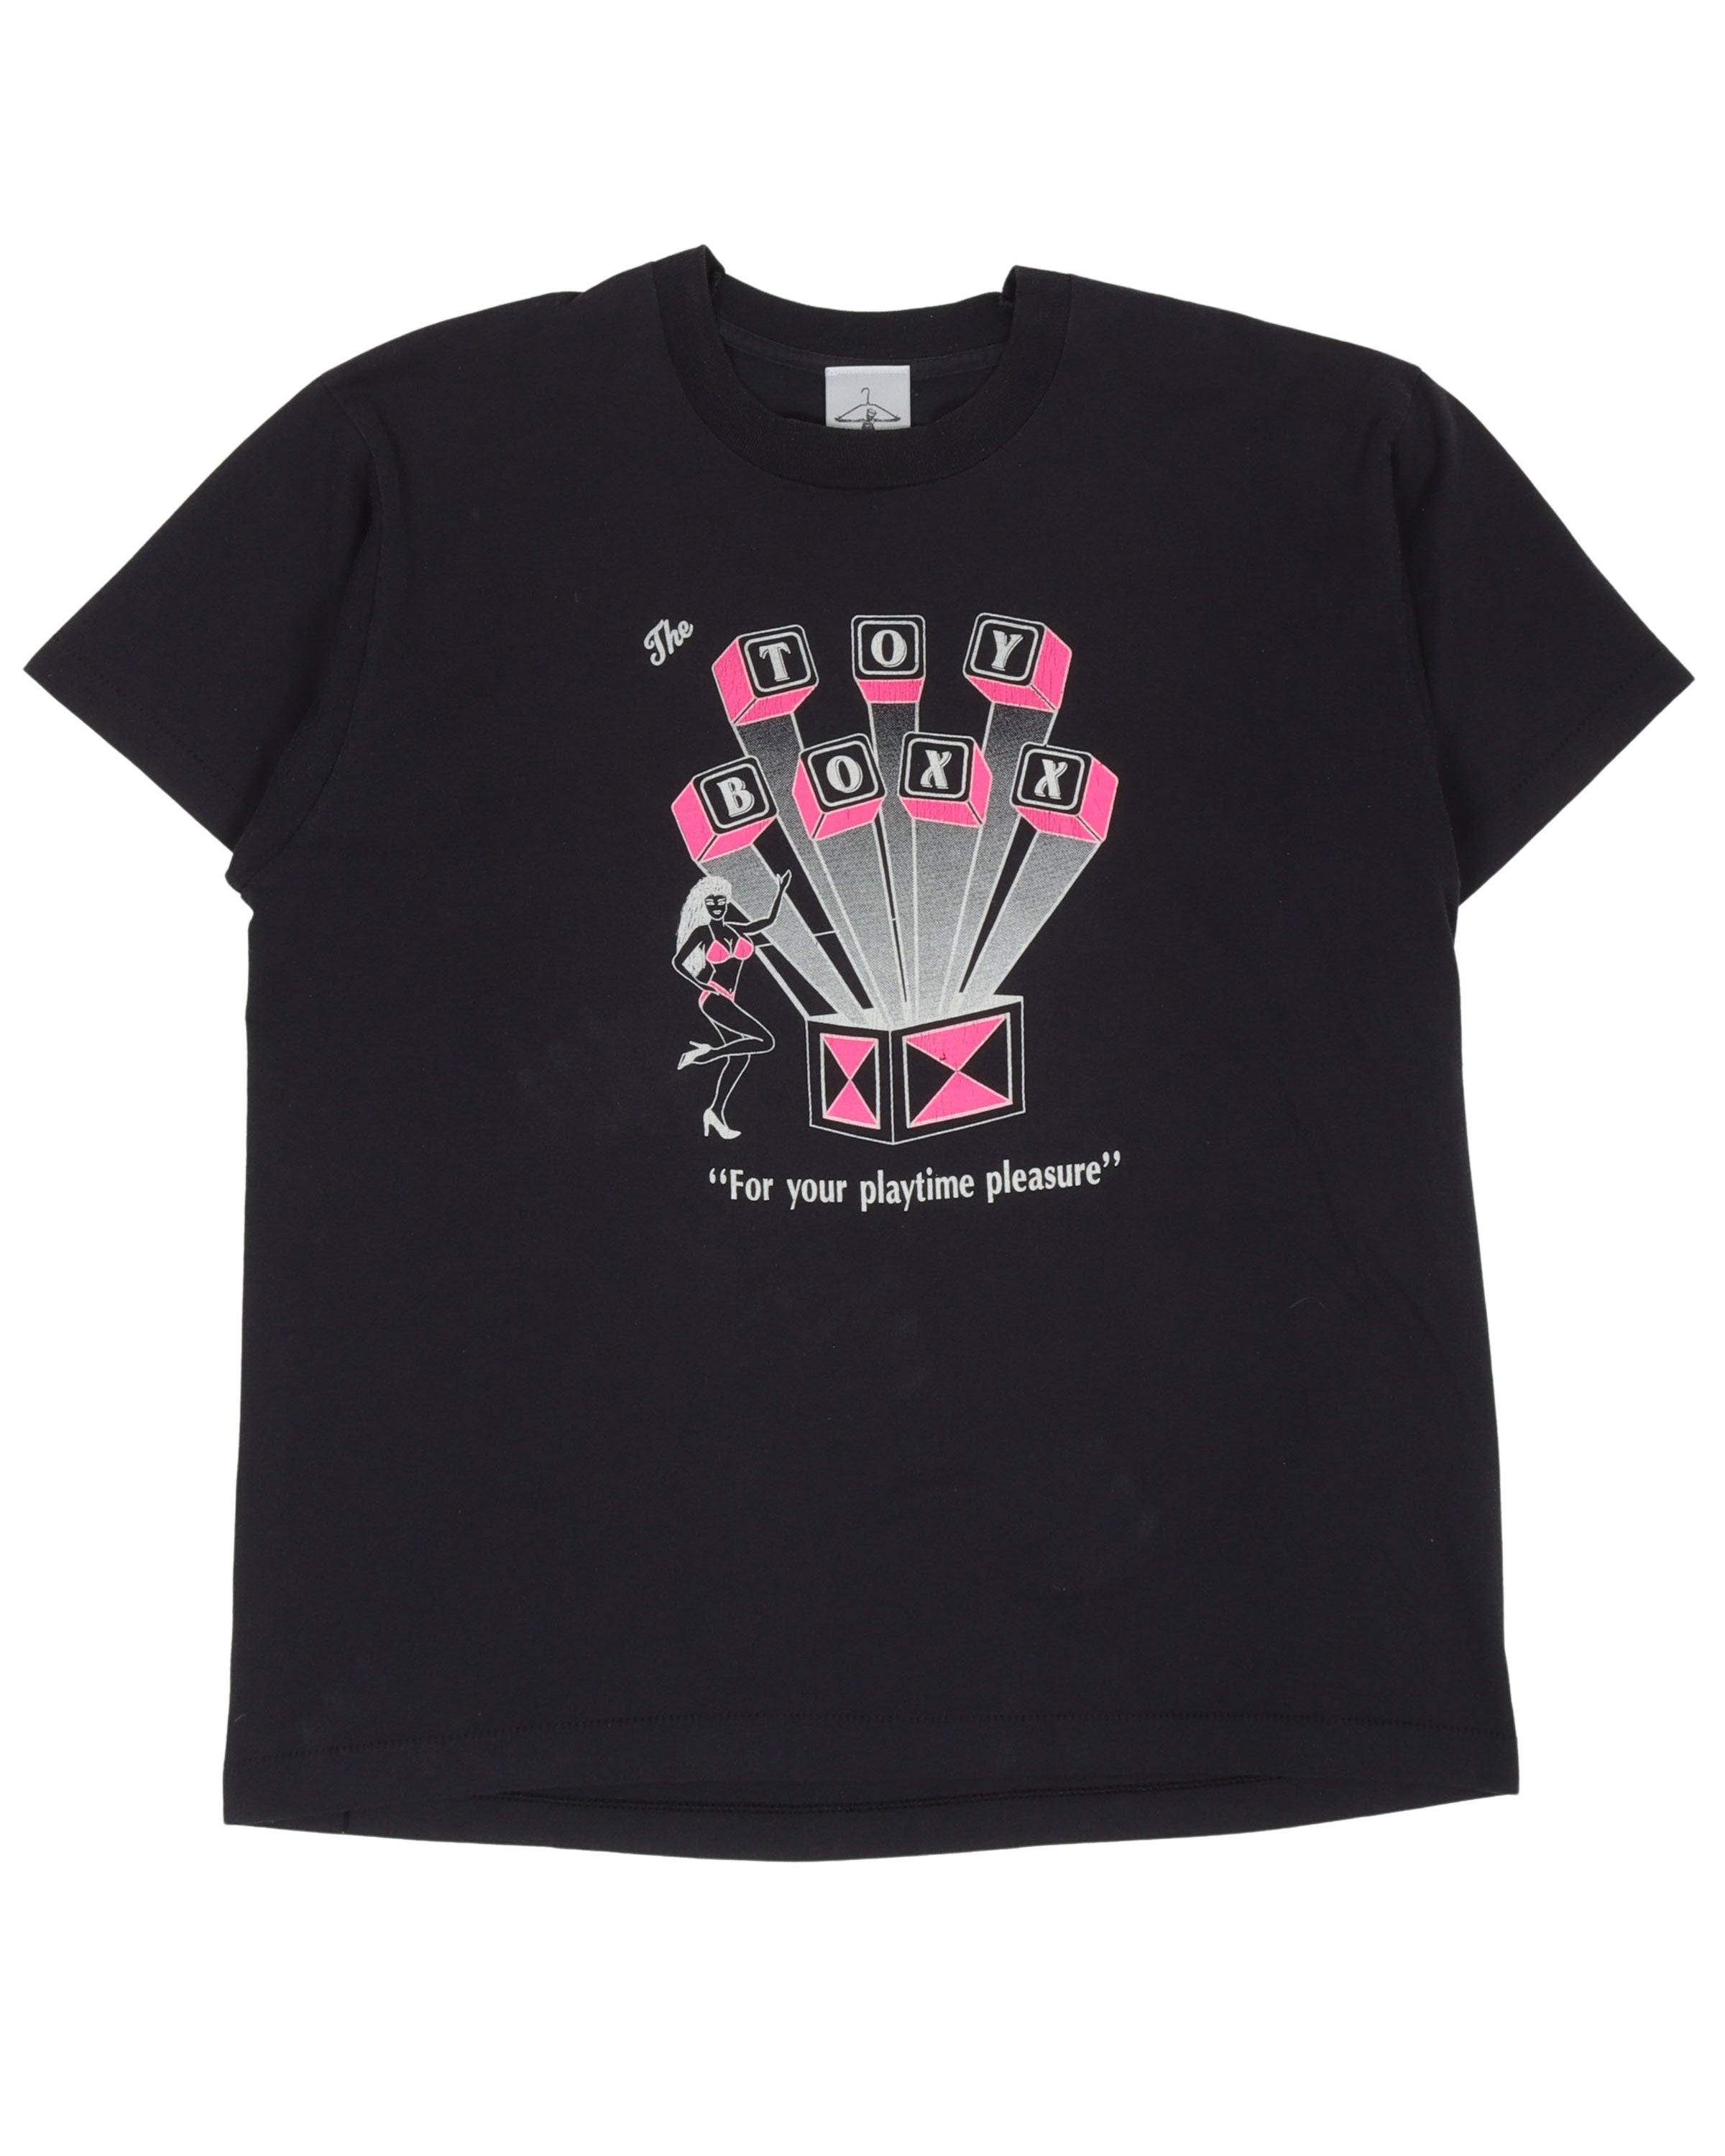 The Toy Boxx "For Your Playtime Pleasure" T-Shirt